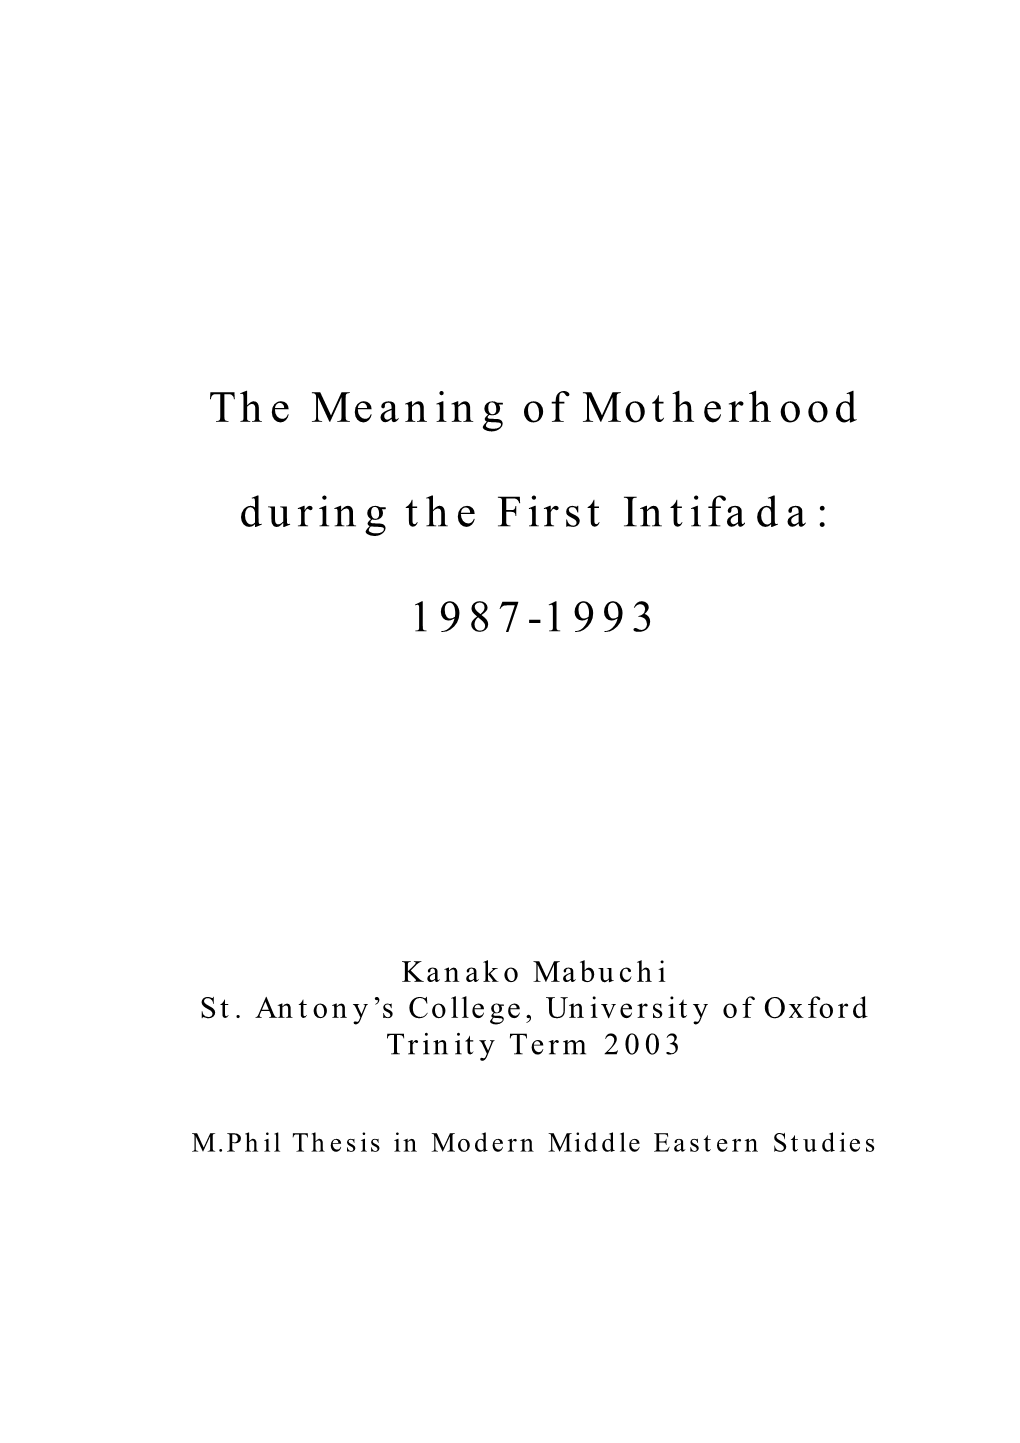 The Meaning of Motherhood During the First Intifada: 1987-1993.” the Dissertation Will First Examine the Symbolism of Gender in the Language of Nationalism